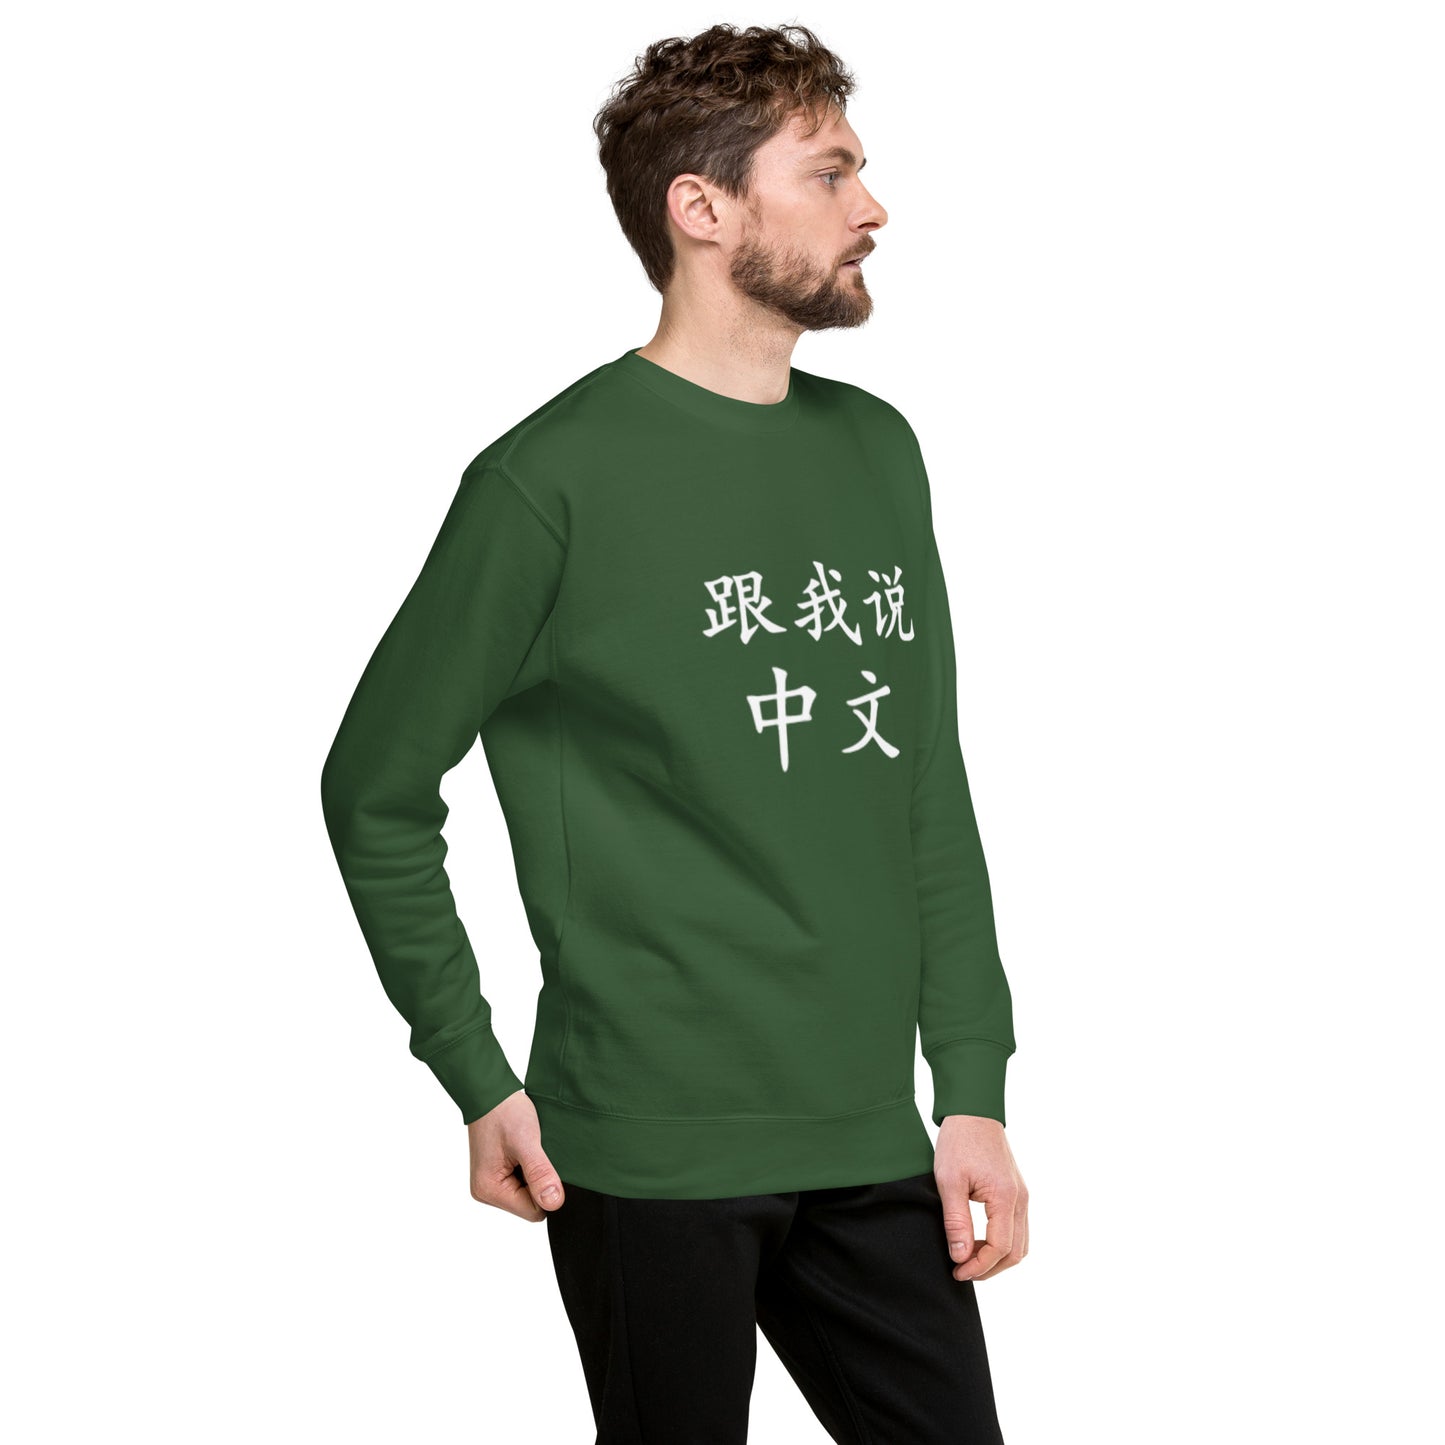 Mandarin Chinese Characters Clothes, Funny, Humorous writing, Teacher  Approved, Basic Speak Chinese with Me跟我说中文Unisex Premium Sweatshirt